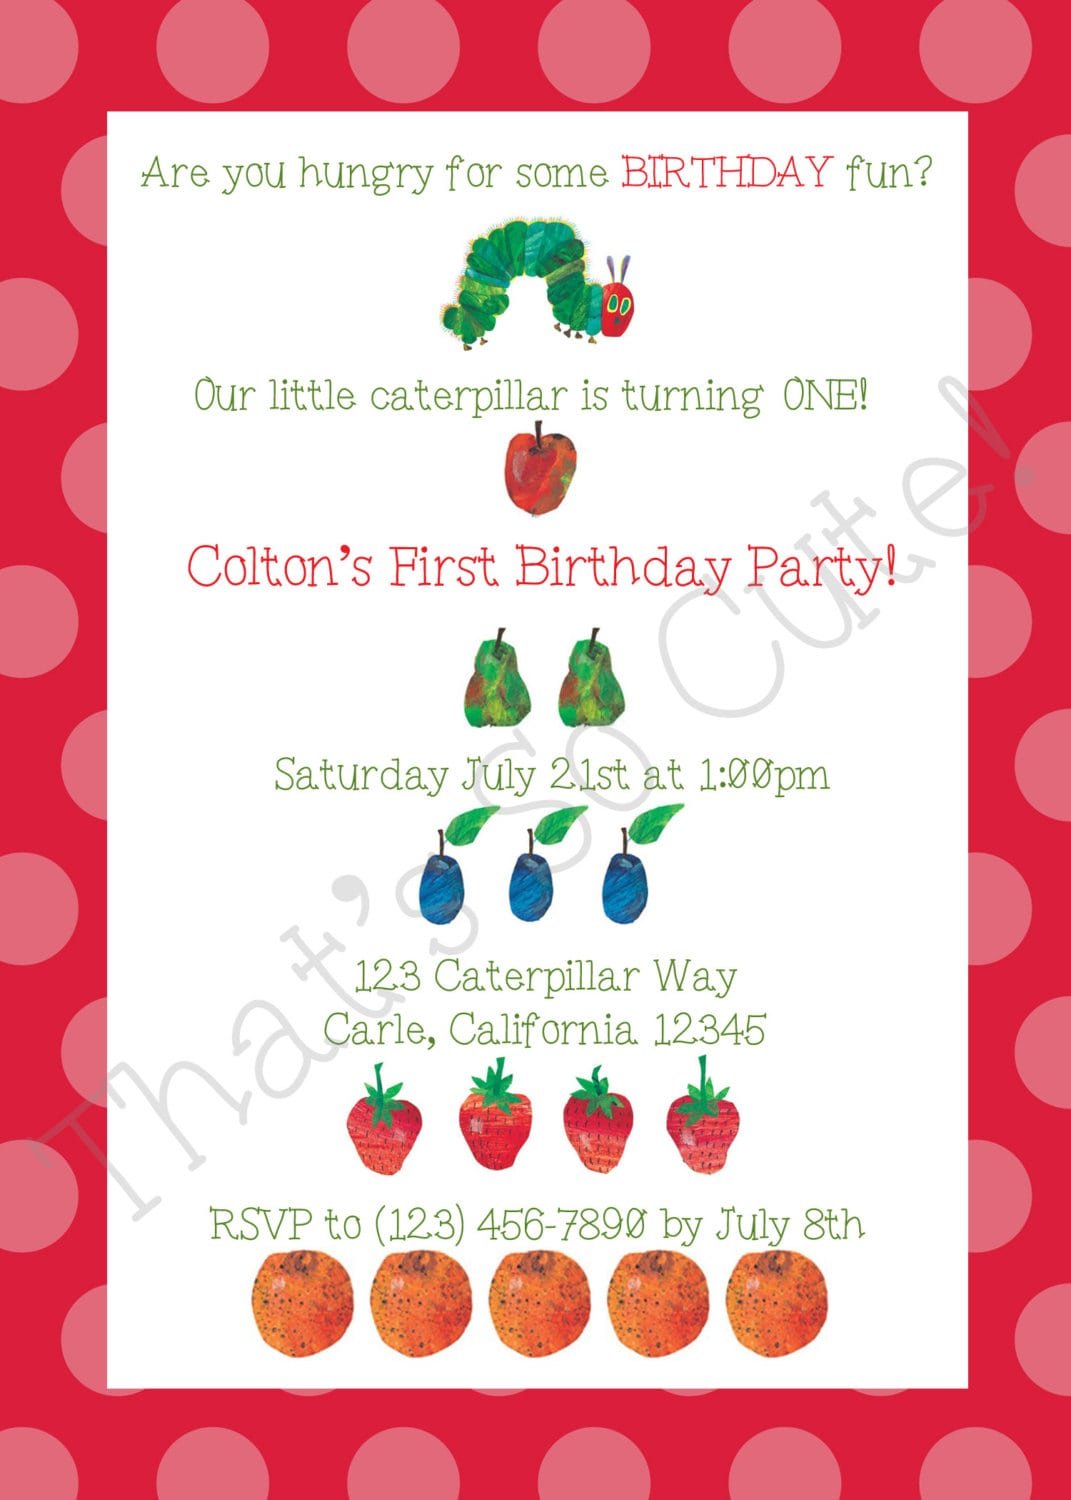 17 Best Images About Very Hungry Caterpillar Party On Pinterest